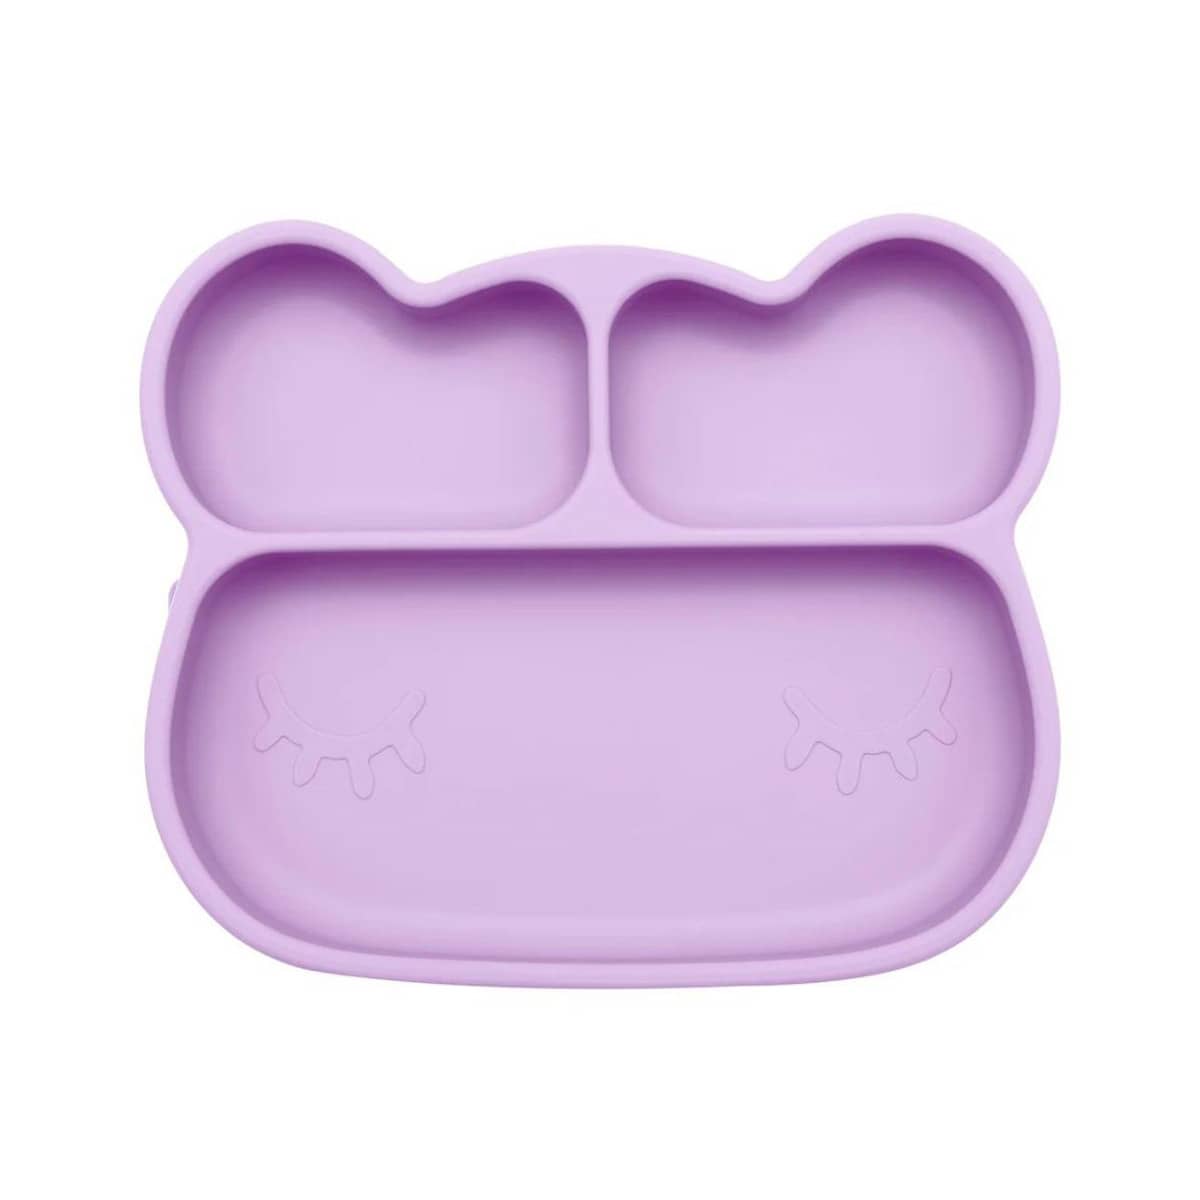 We Might Be Tiny Stickie Silicone Suction Plate - Bear - Lilac